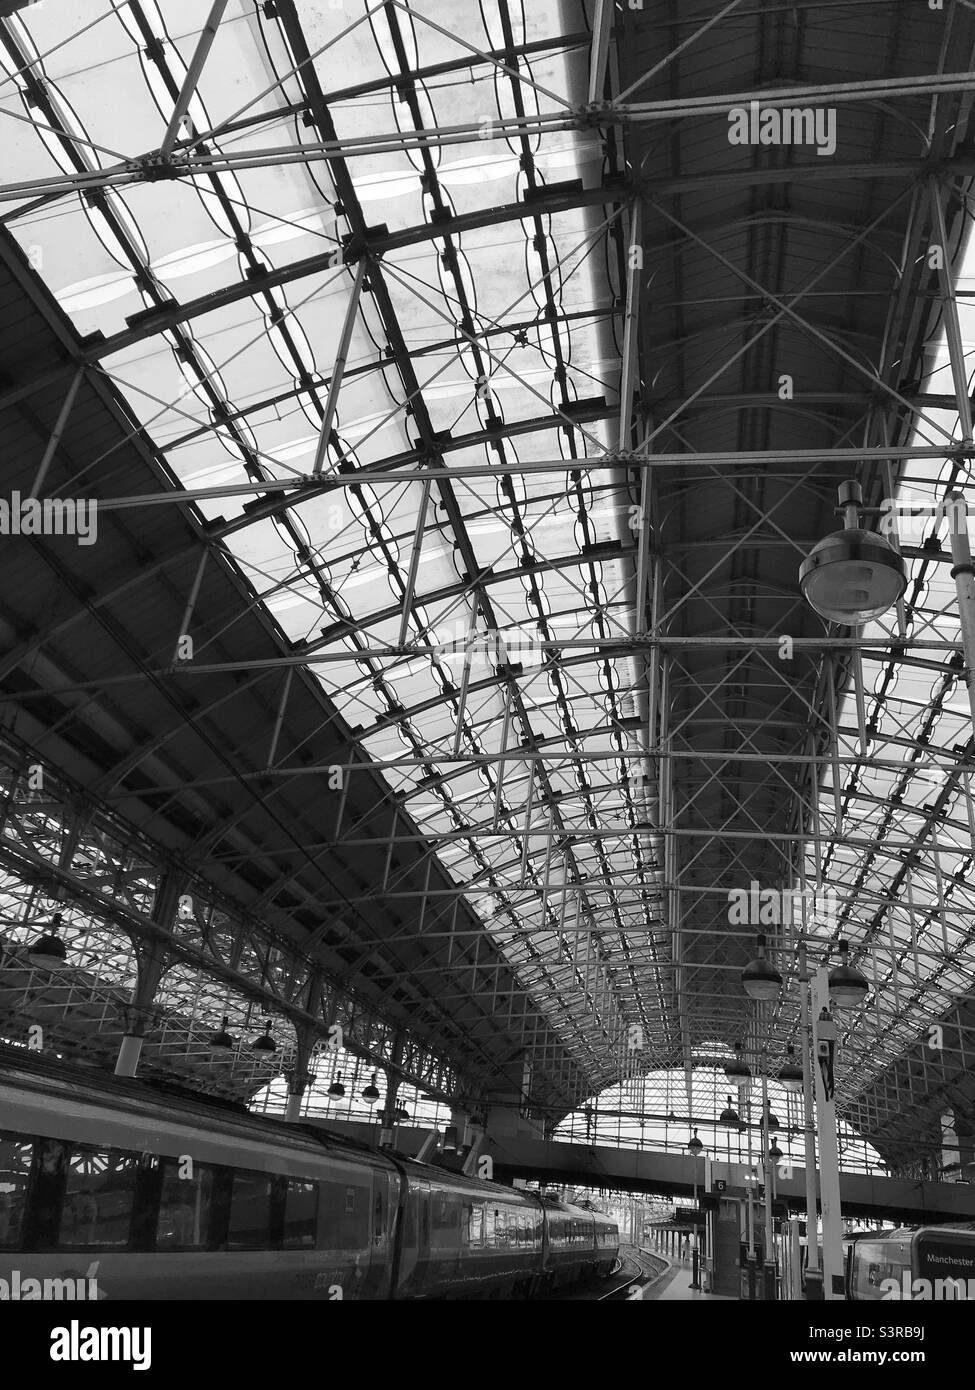 Manchester Piccadilly train station Stock Photo